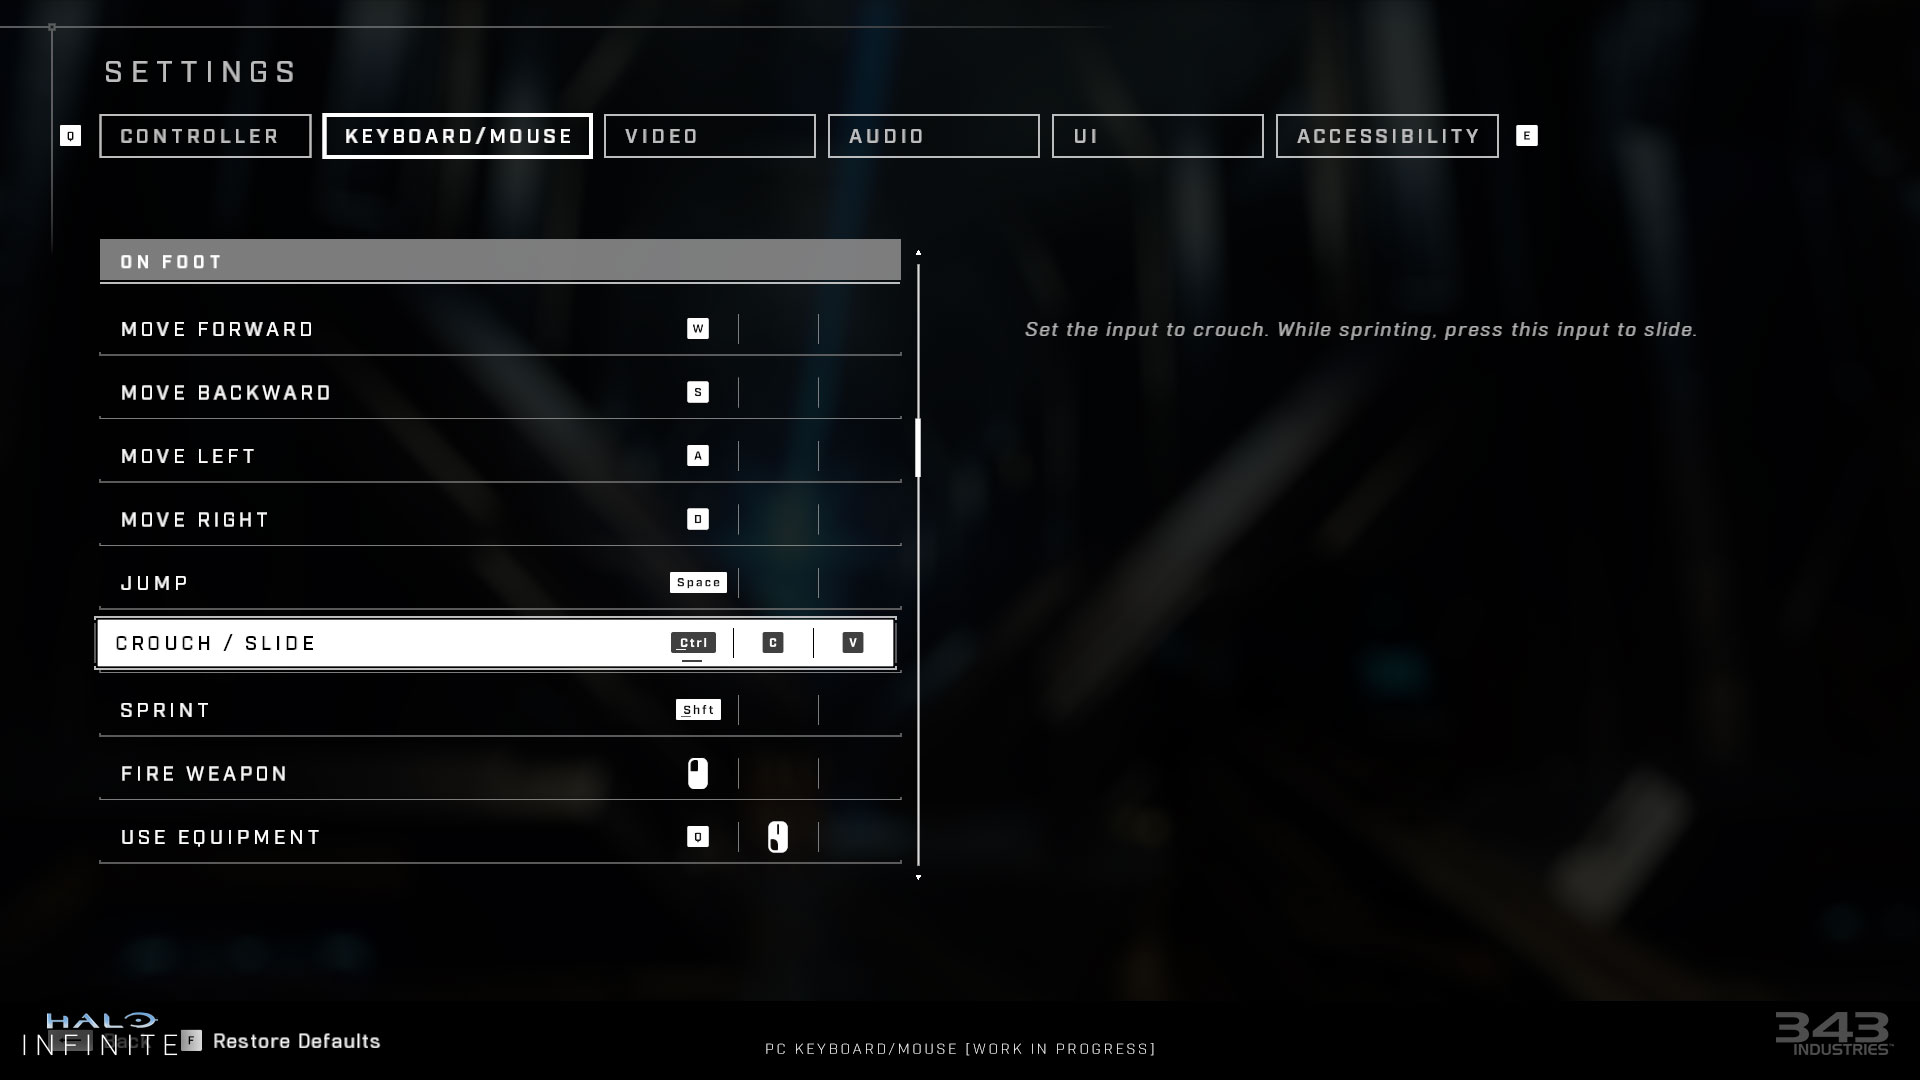 For mouse and keyboard players, Halo Infinite will support triple key binds allowing one specific action to be assigned to three different inputs.